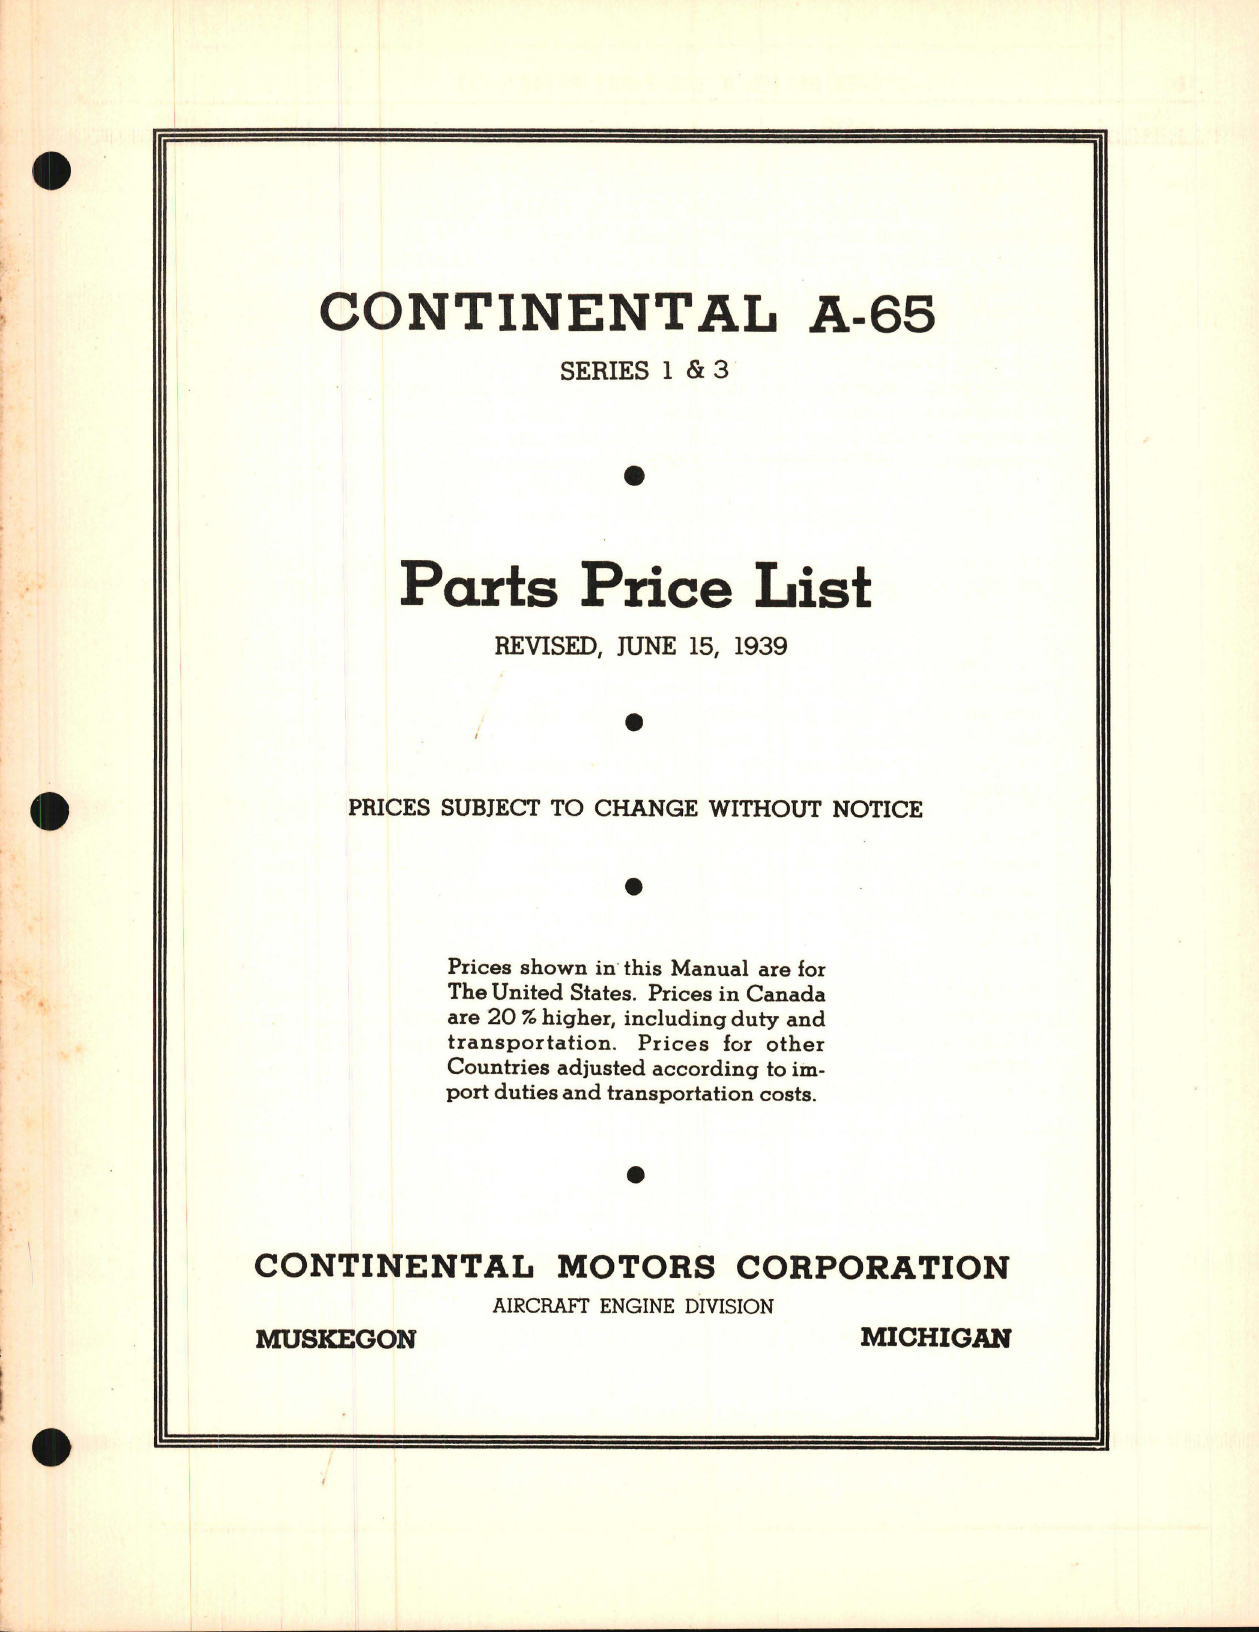 Sample page 1 from AirCorps Library document: Parts Price List for Continental A-65 - Series 1 and Series 3